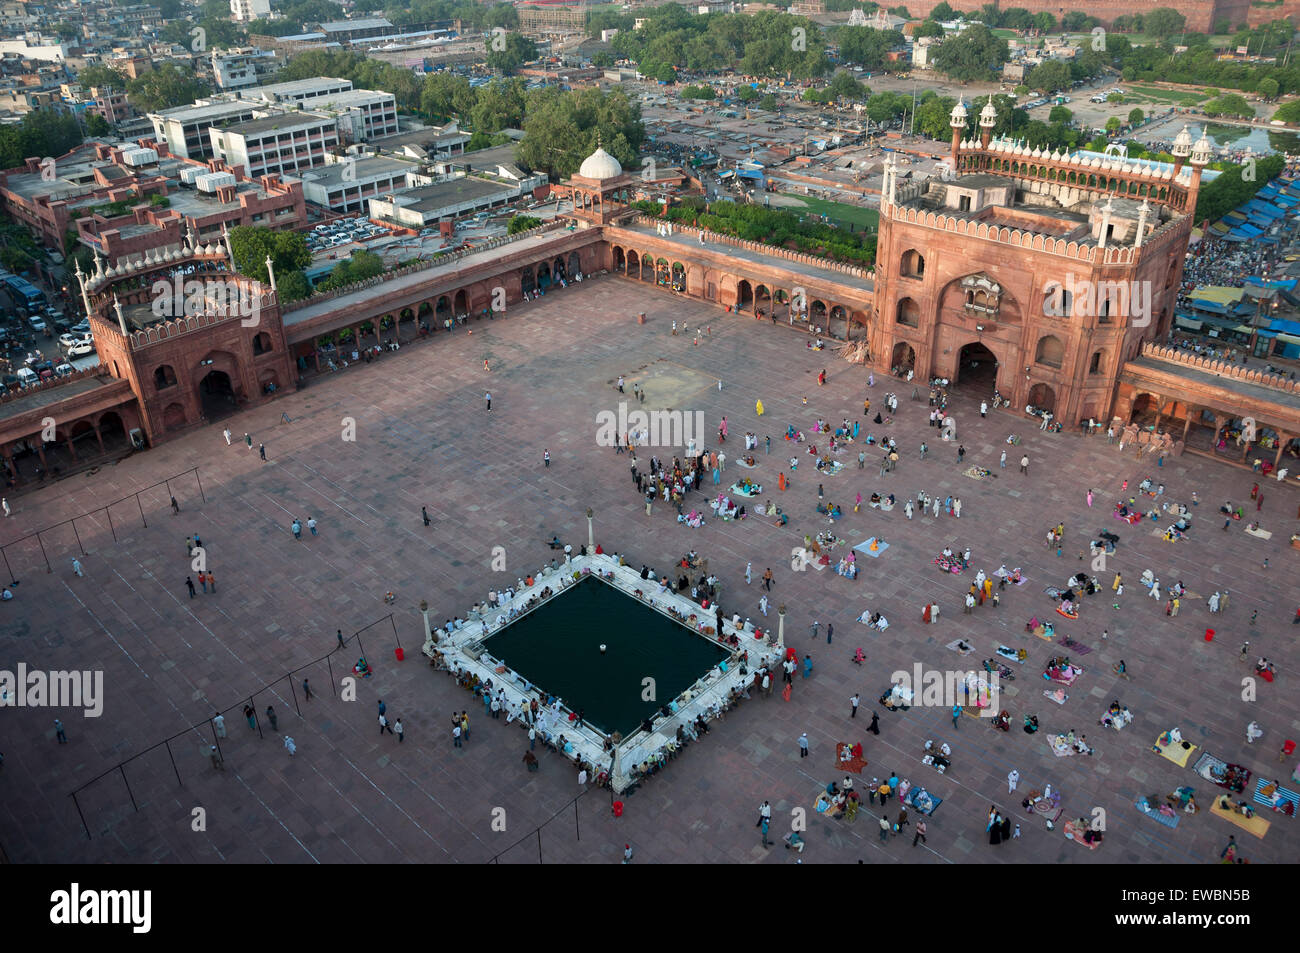 Ablution pond at the Jama Masjid mosque in old Delhi, India, seen from one of the minarets of the mosque. Stock Photo